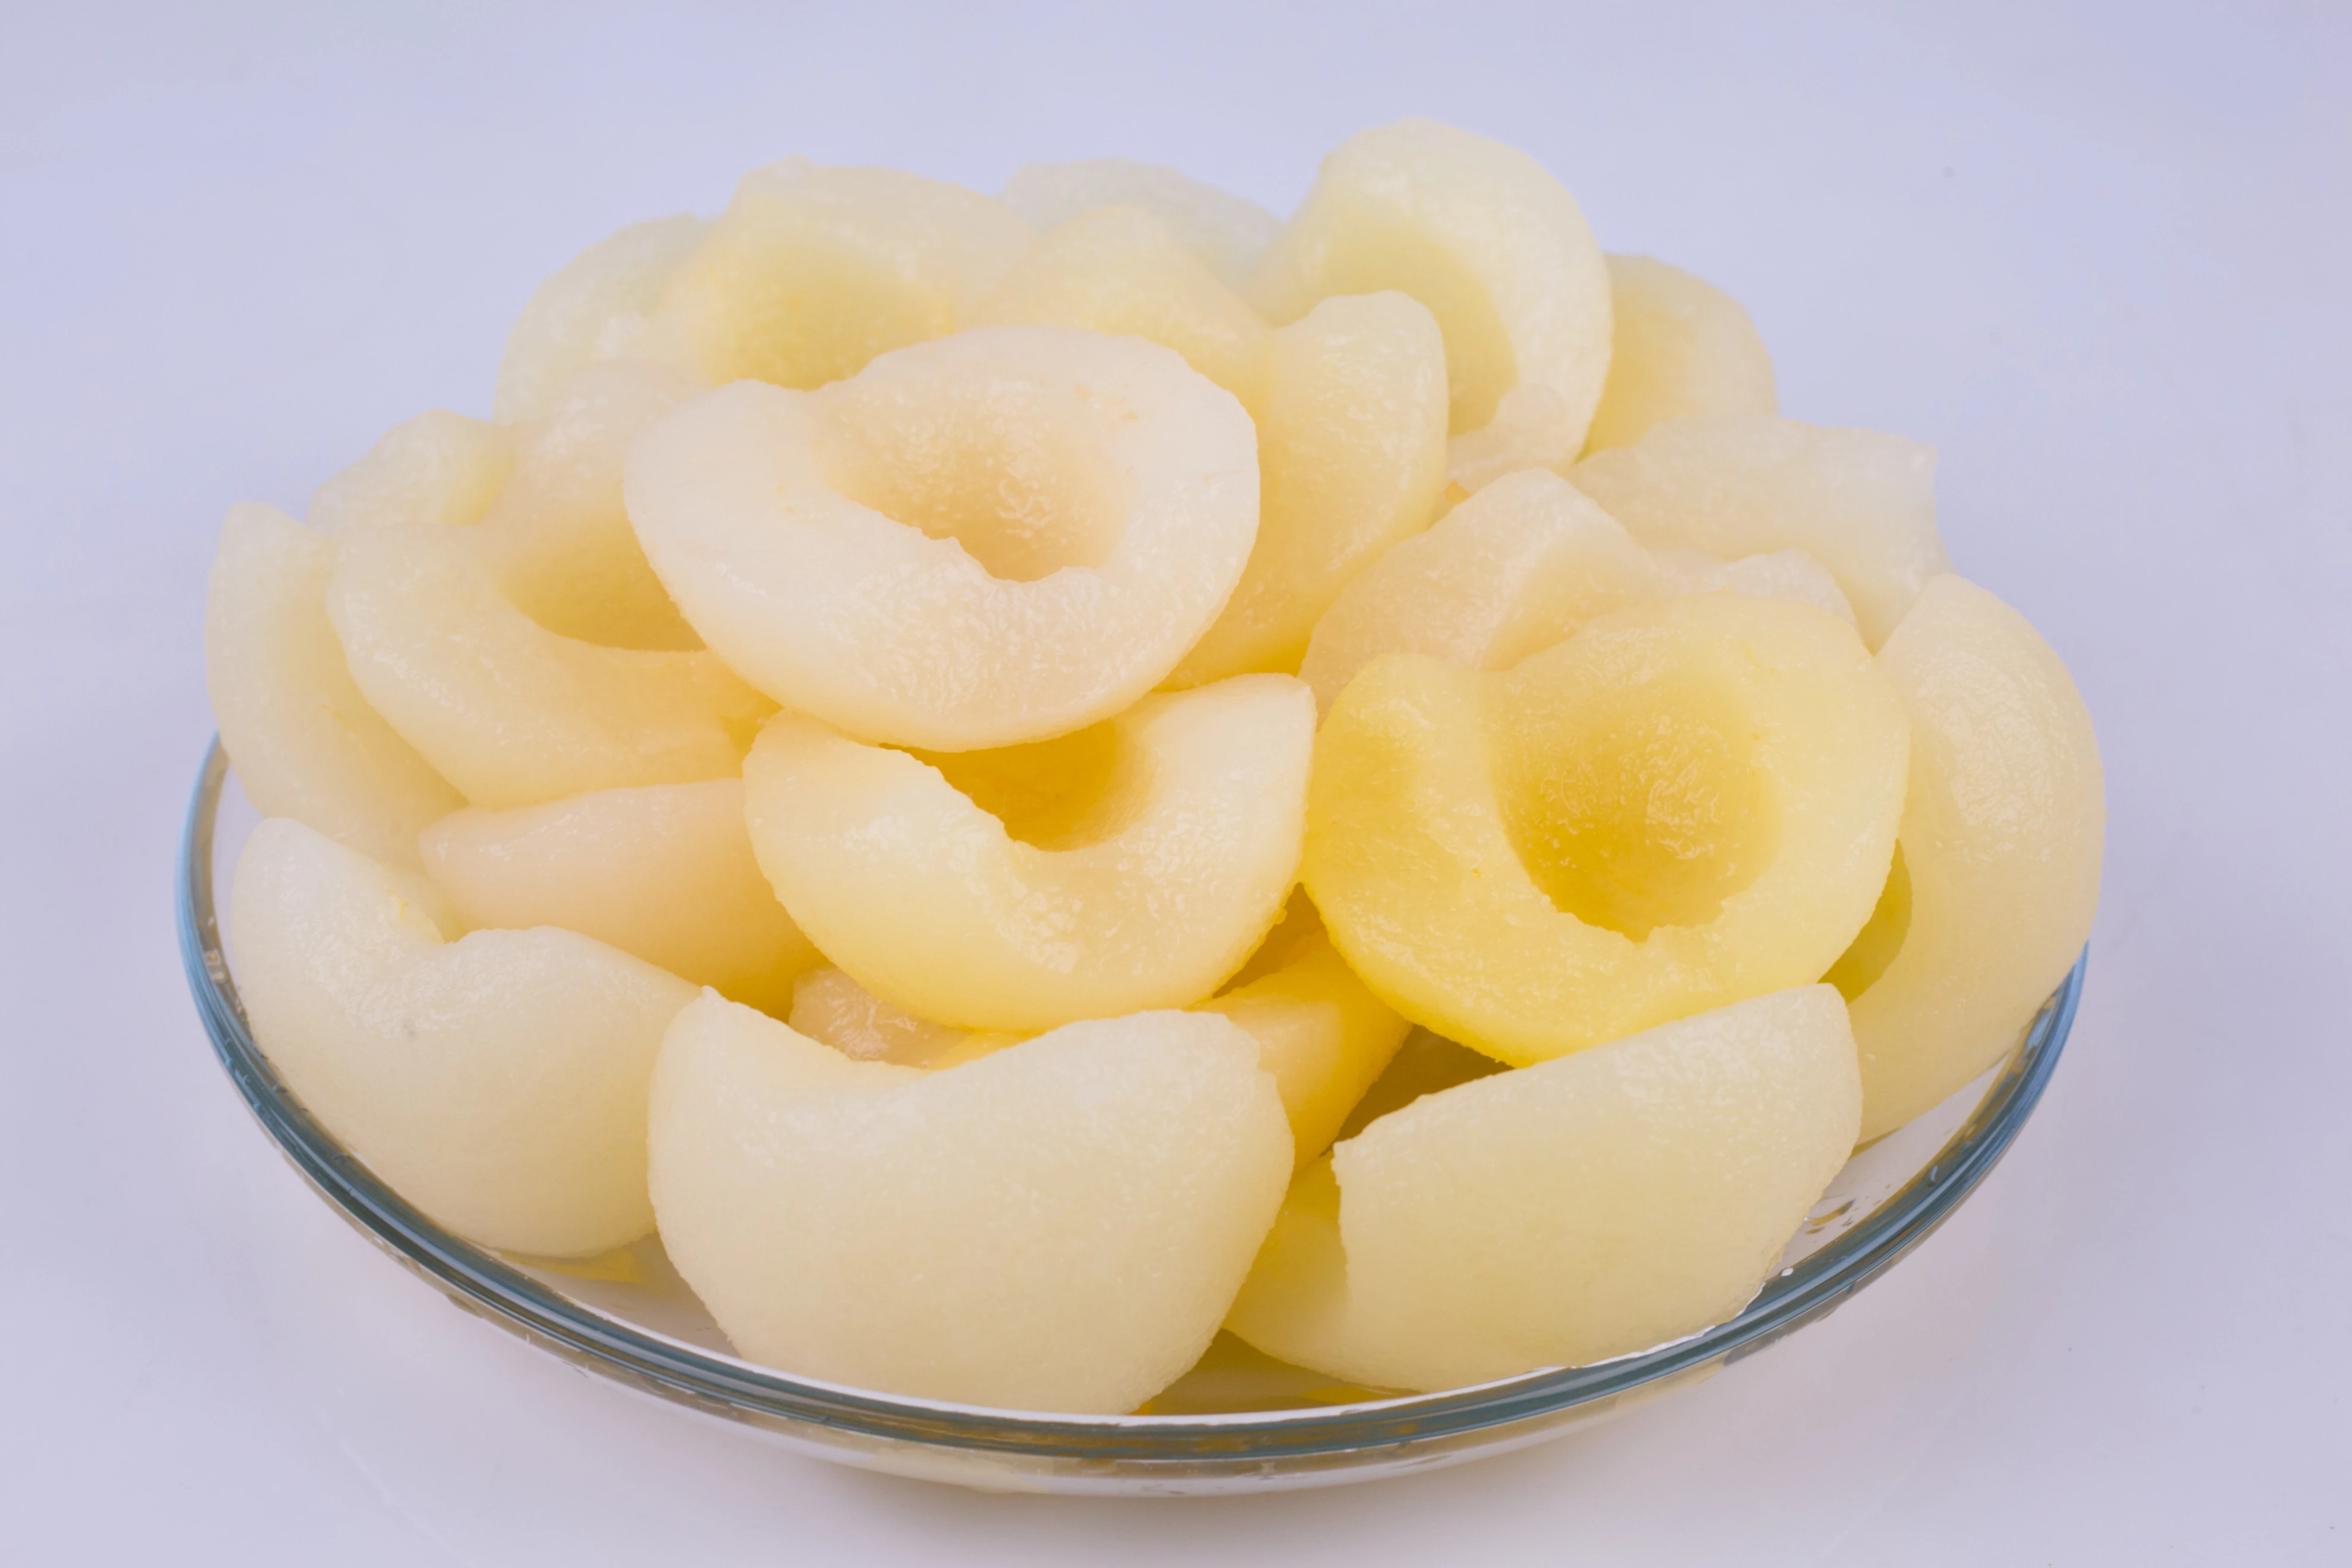 Canned pears with sweet water, in heavy syrup content are available in China